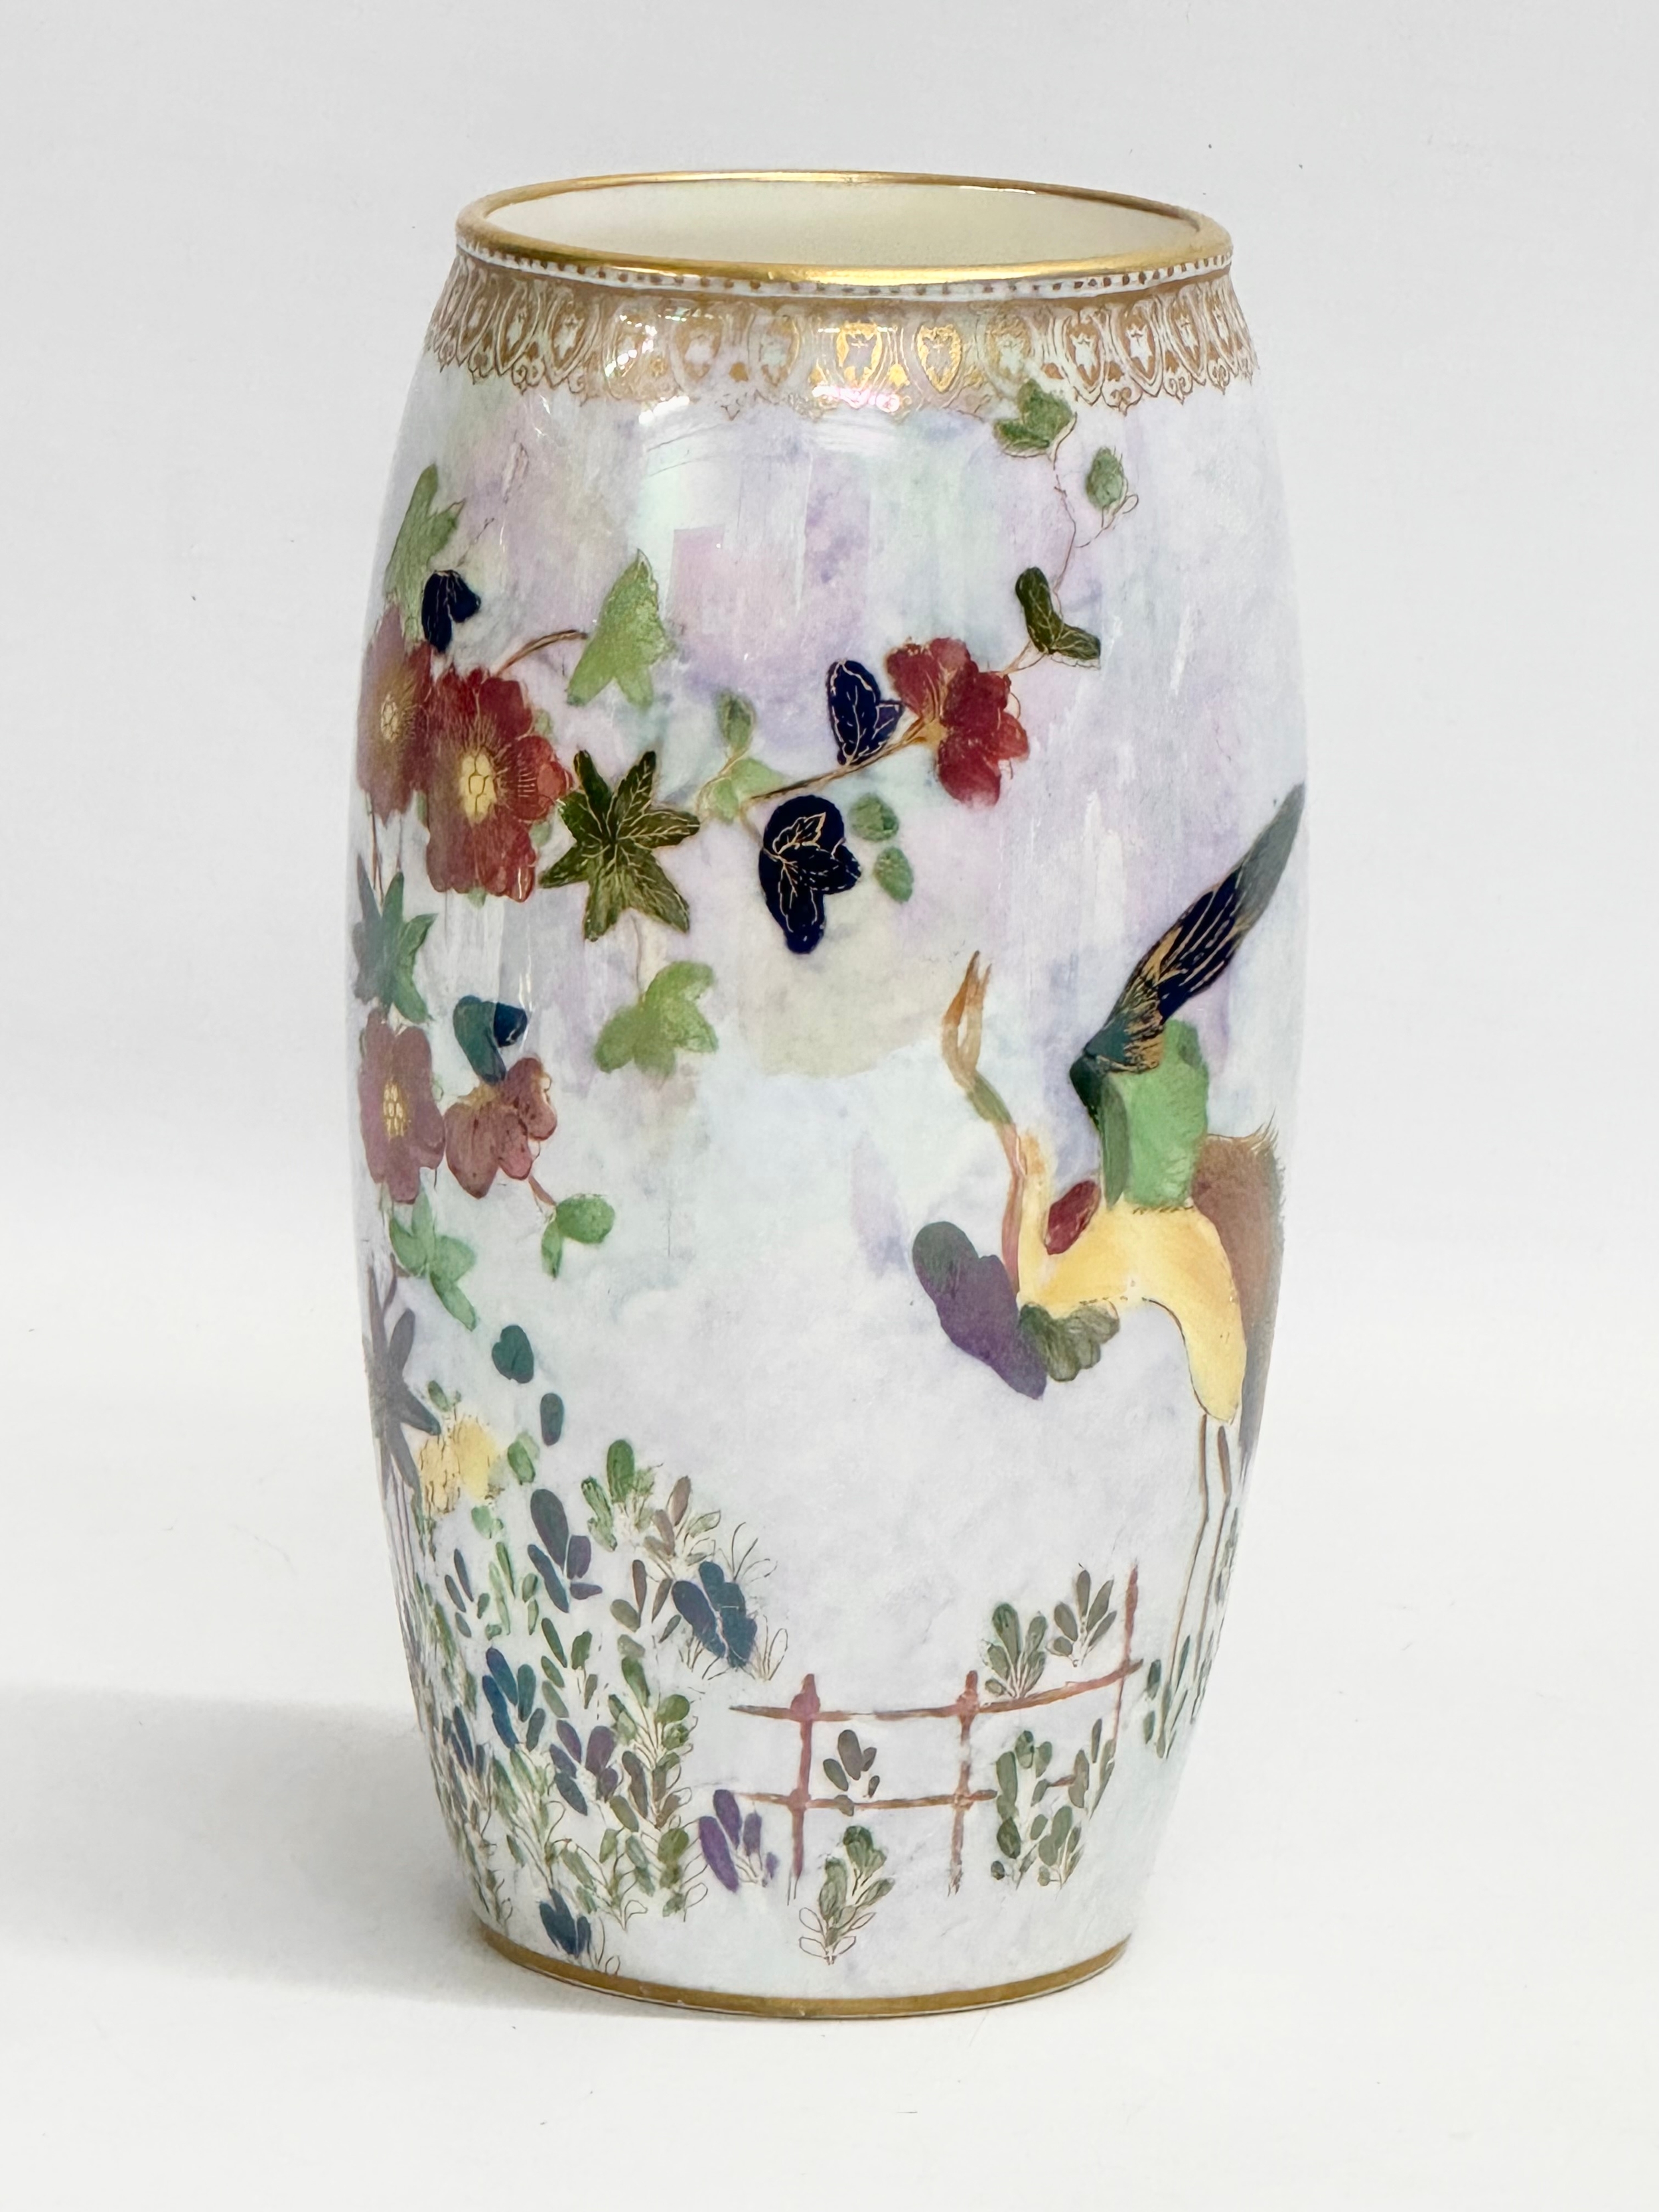 A Royal Doulton lustre vase designed by Herbert Betteley. Early 20th century. 1922-1927. 18cm - Image 8 of 8